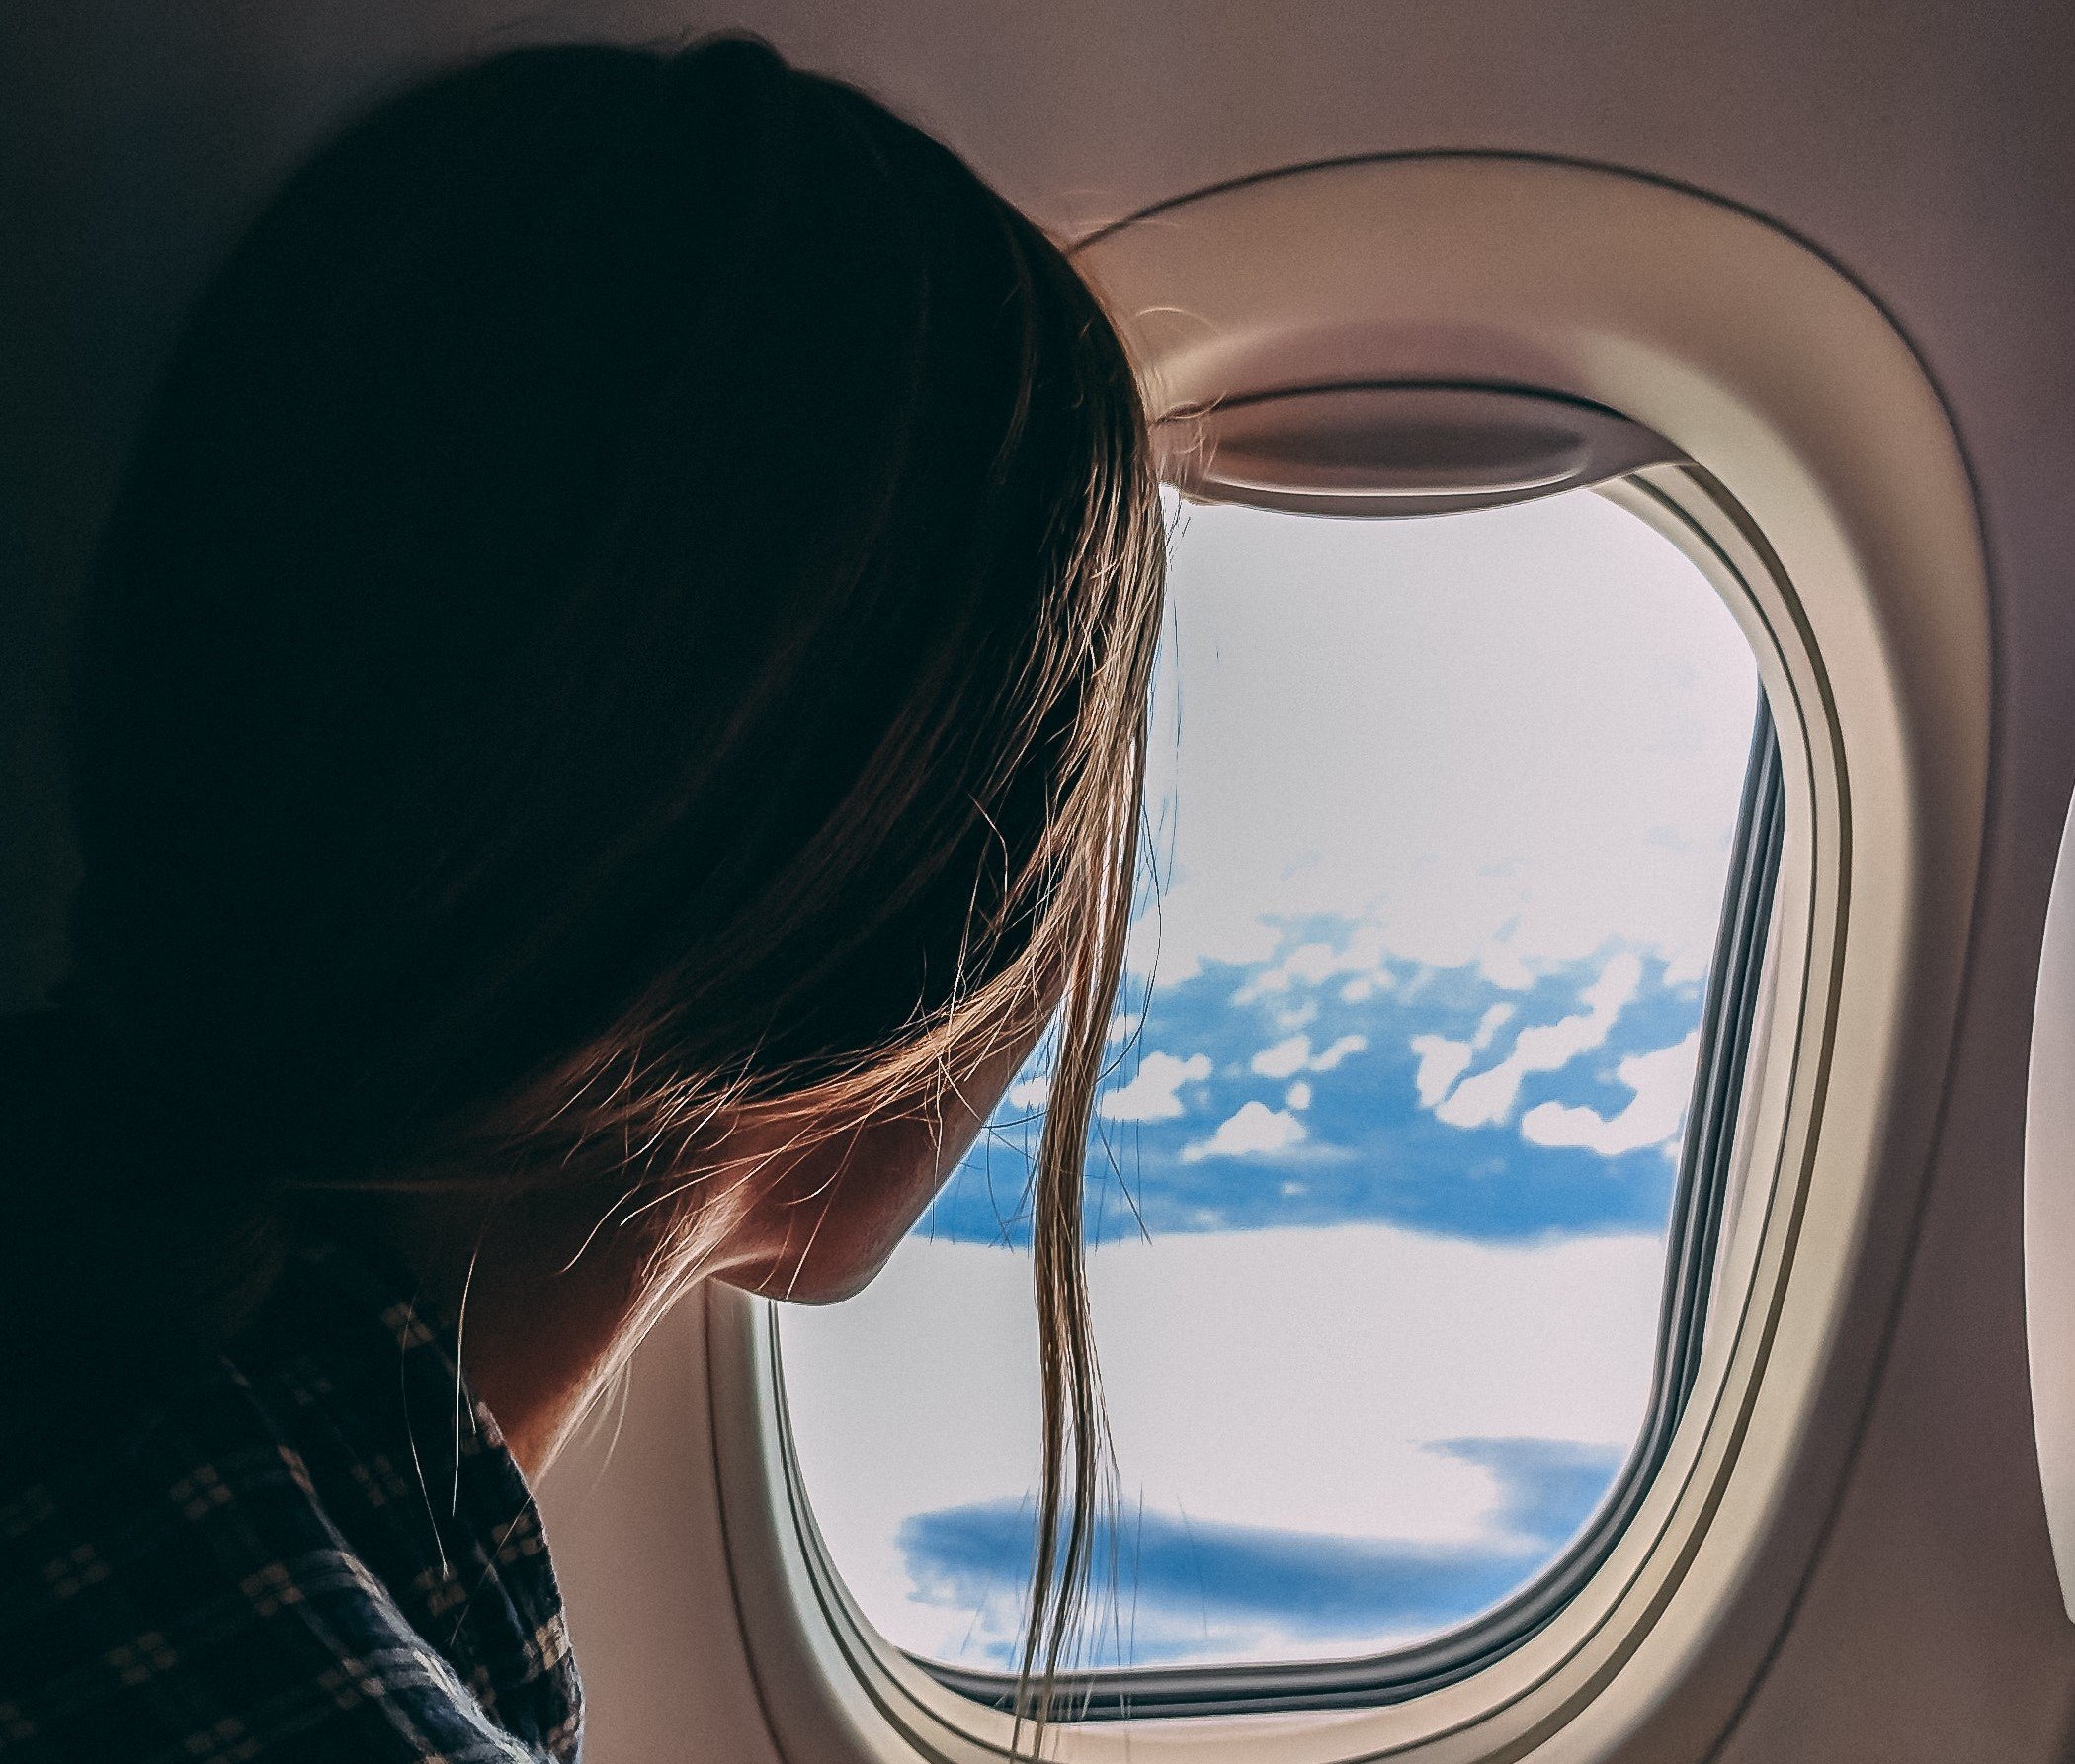 While all was well, Alina suddenly left for a trip, promising Sam she would return soon. | Source: Pexels